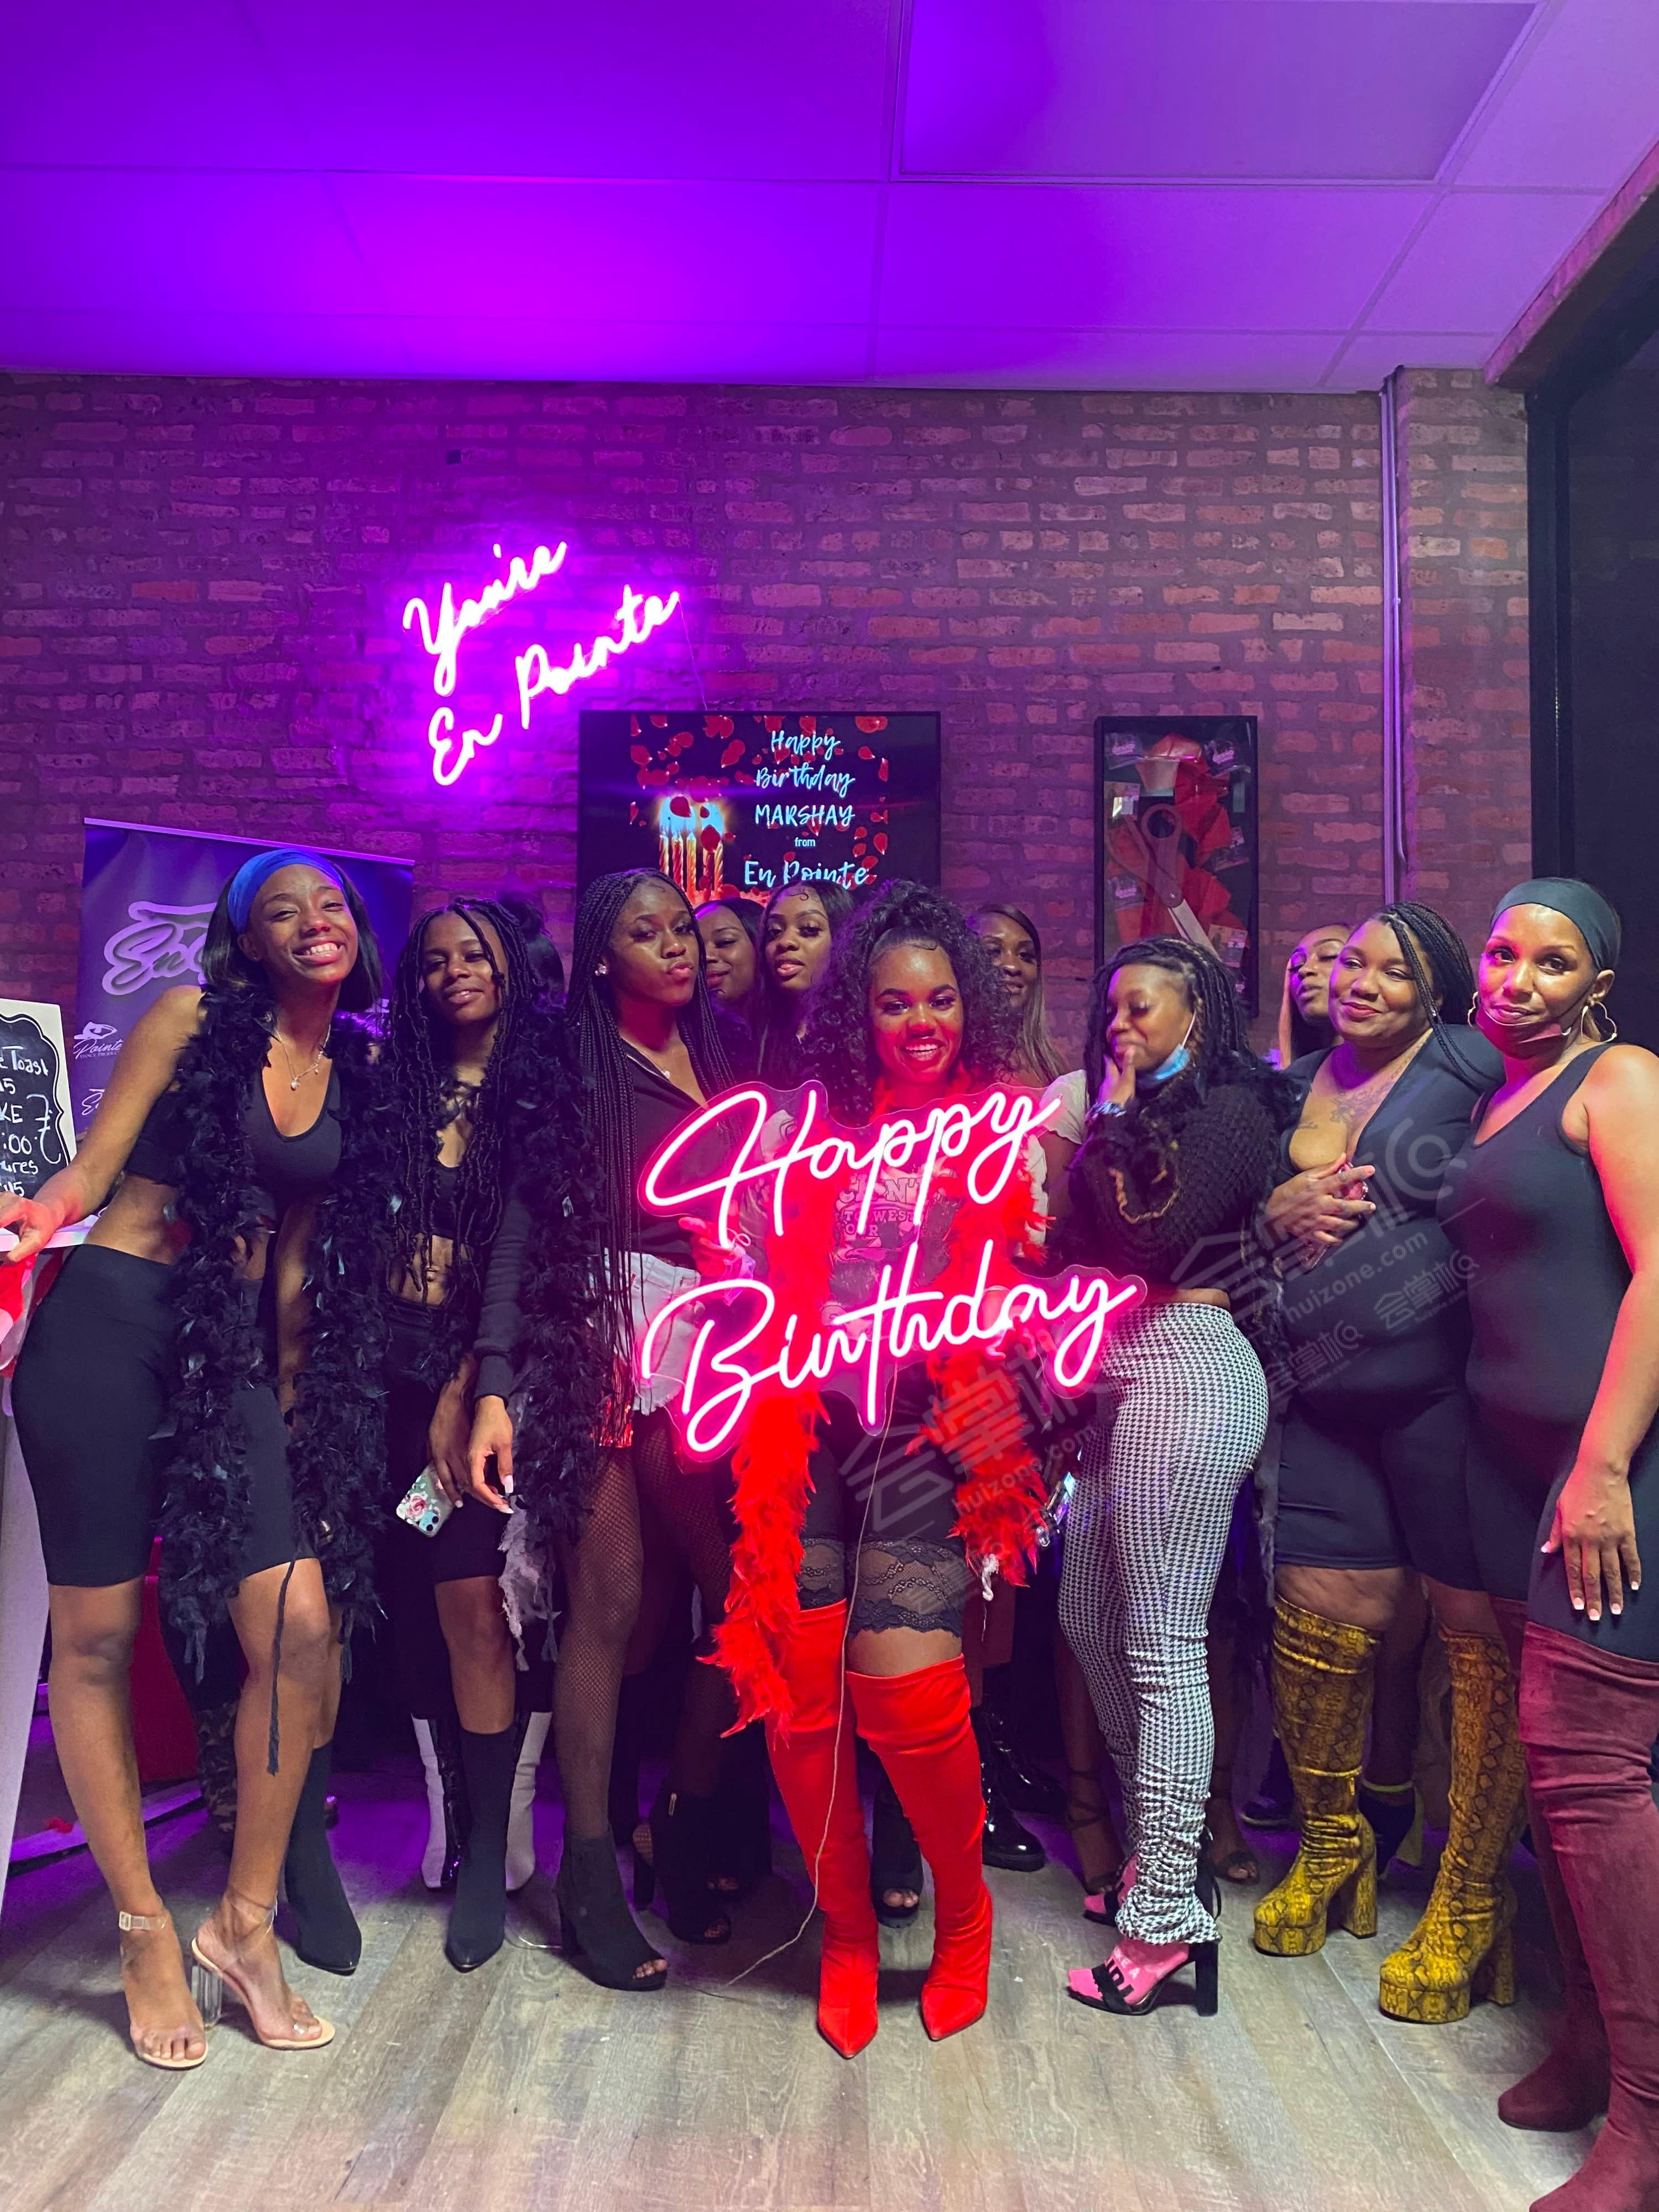 Southside Gem of a Dance Studio to Host your Next Birthday or Bachelorette Party